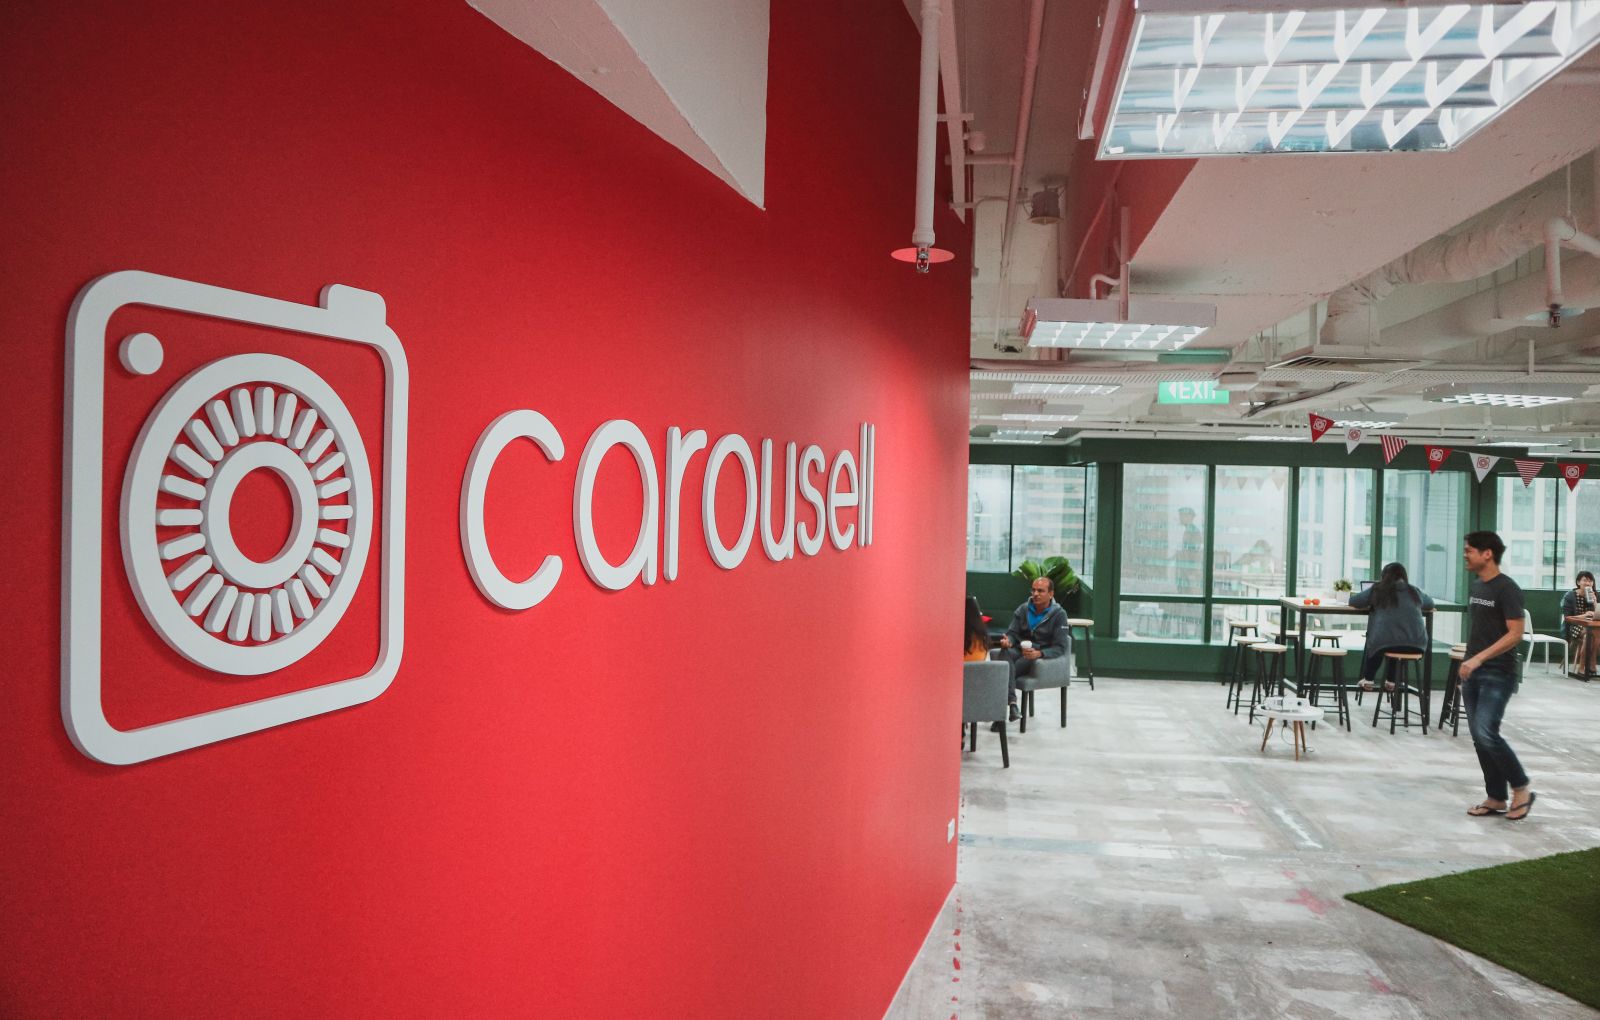 Teen arrested for concert ticket scam on Carousell worth $5,400